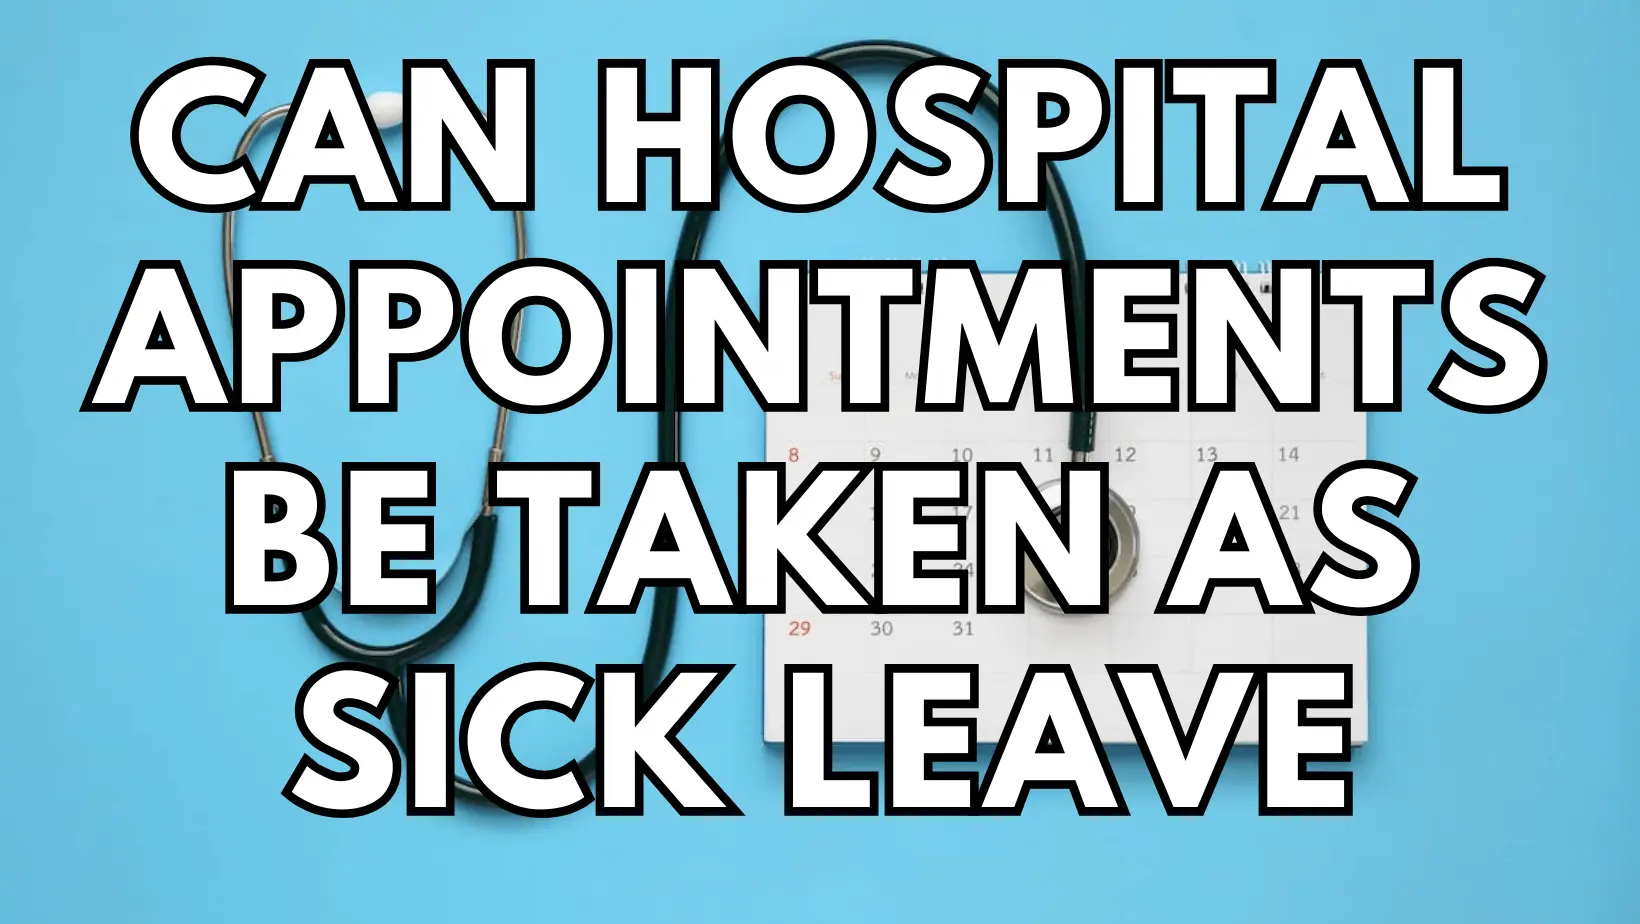 can hospital appointments be taken as sick leave featured image